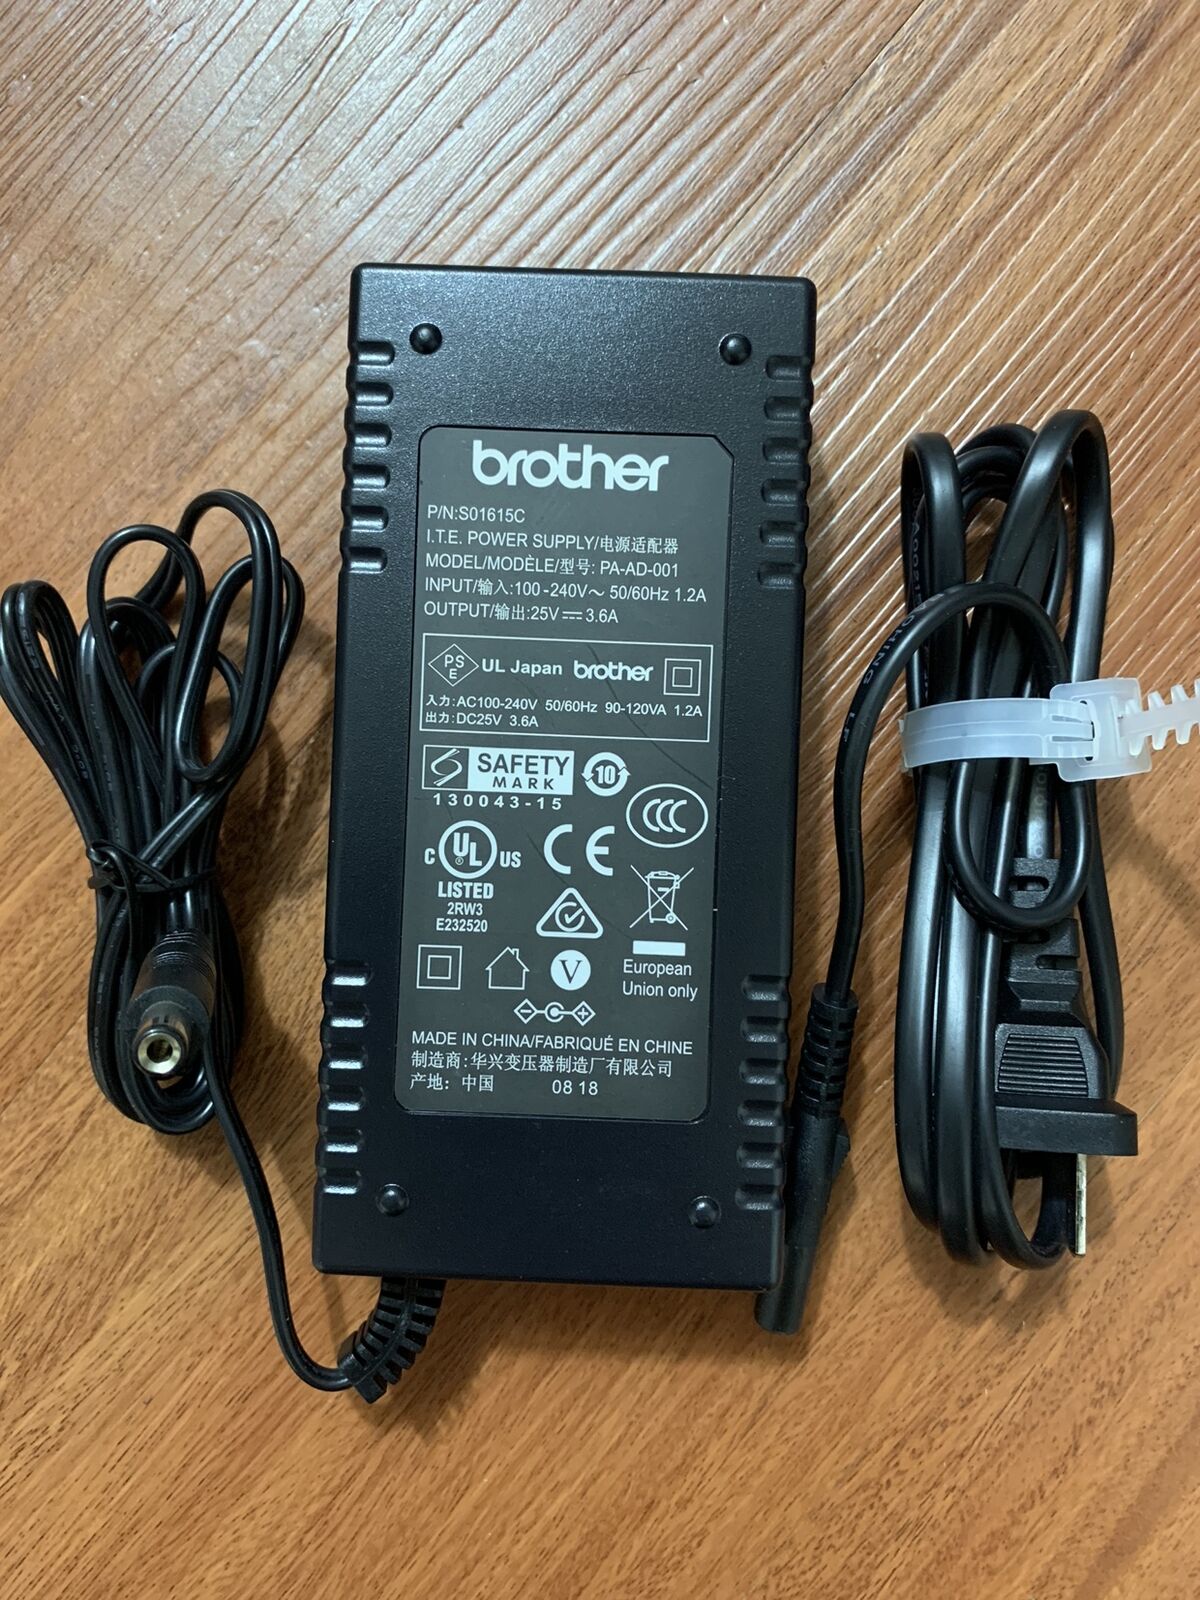 Genuine Brother AC Adapter for Brother PA-AD-001 Label Printer Power Charger Brand: Brother Type: